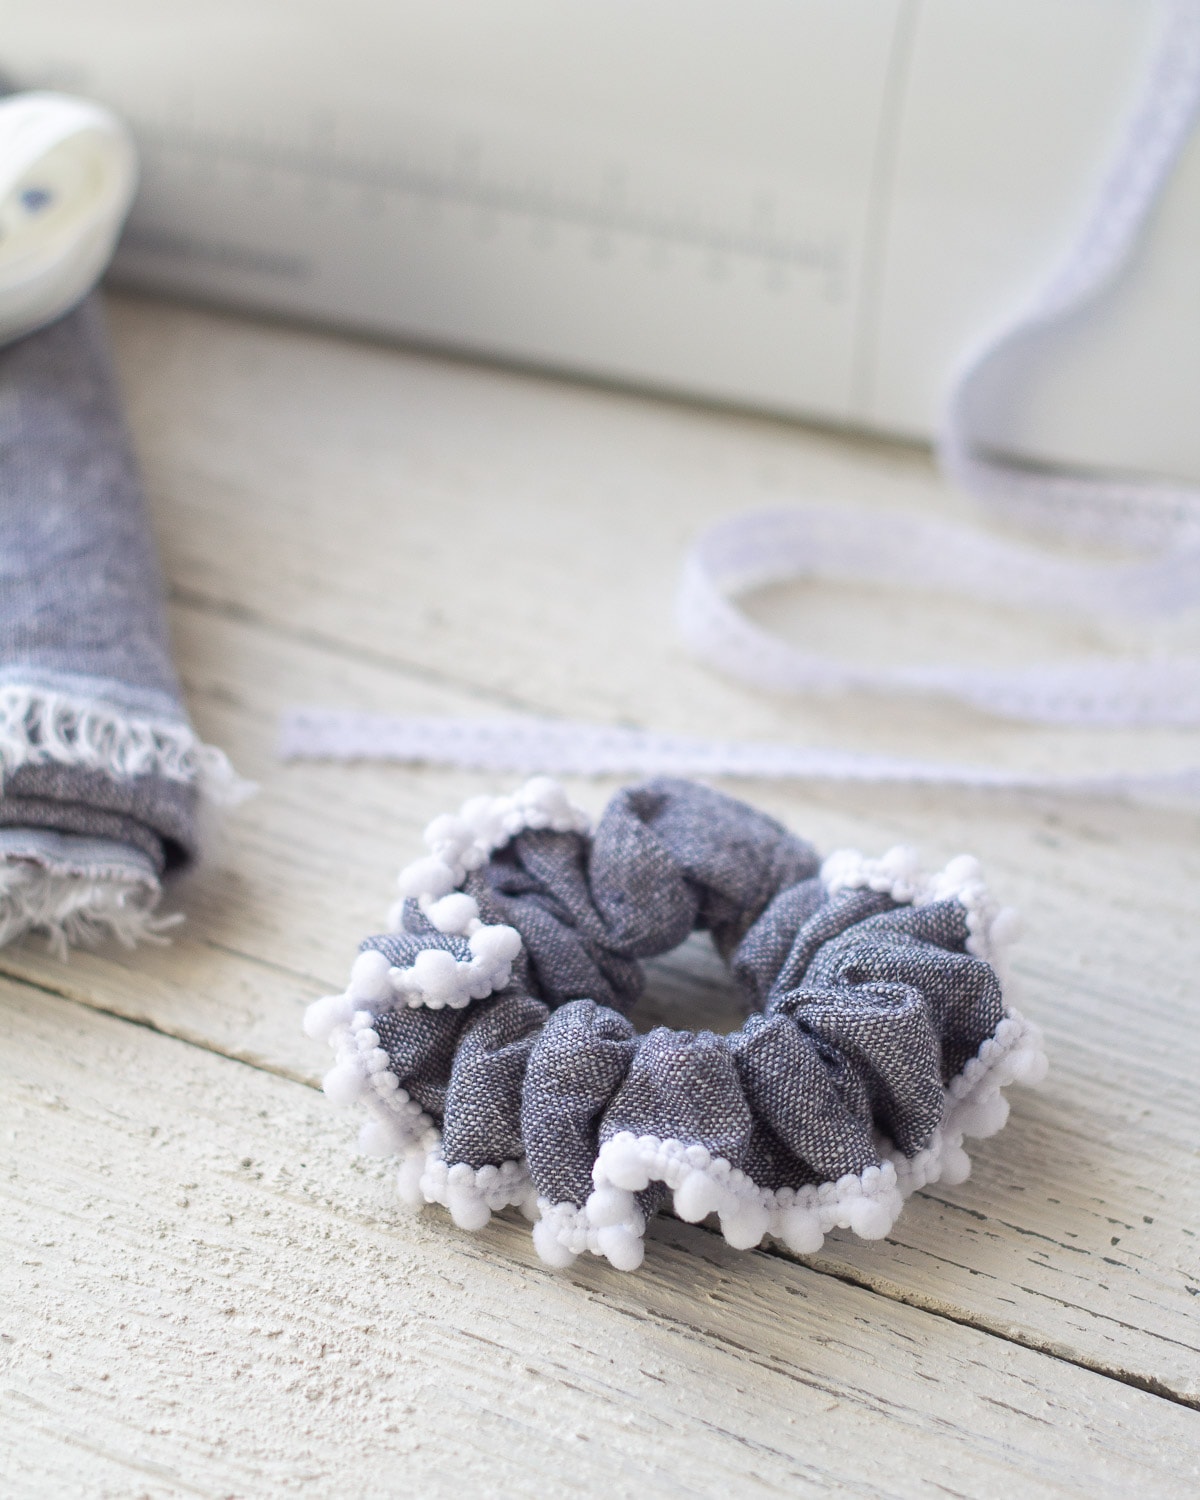 Scrunchie sewn with linen and edged with a white pom-pom trim.